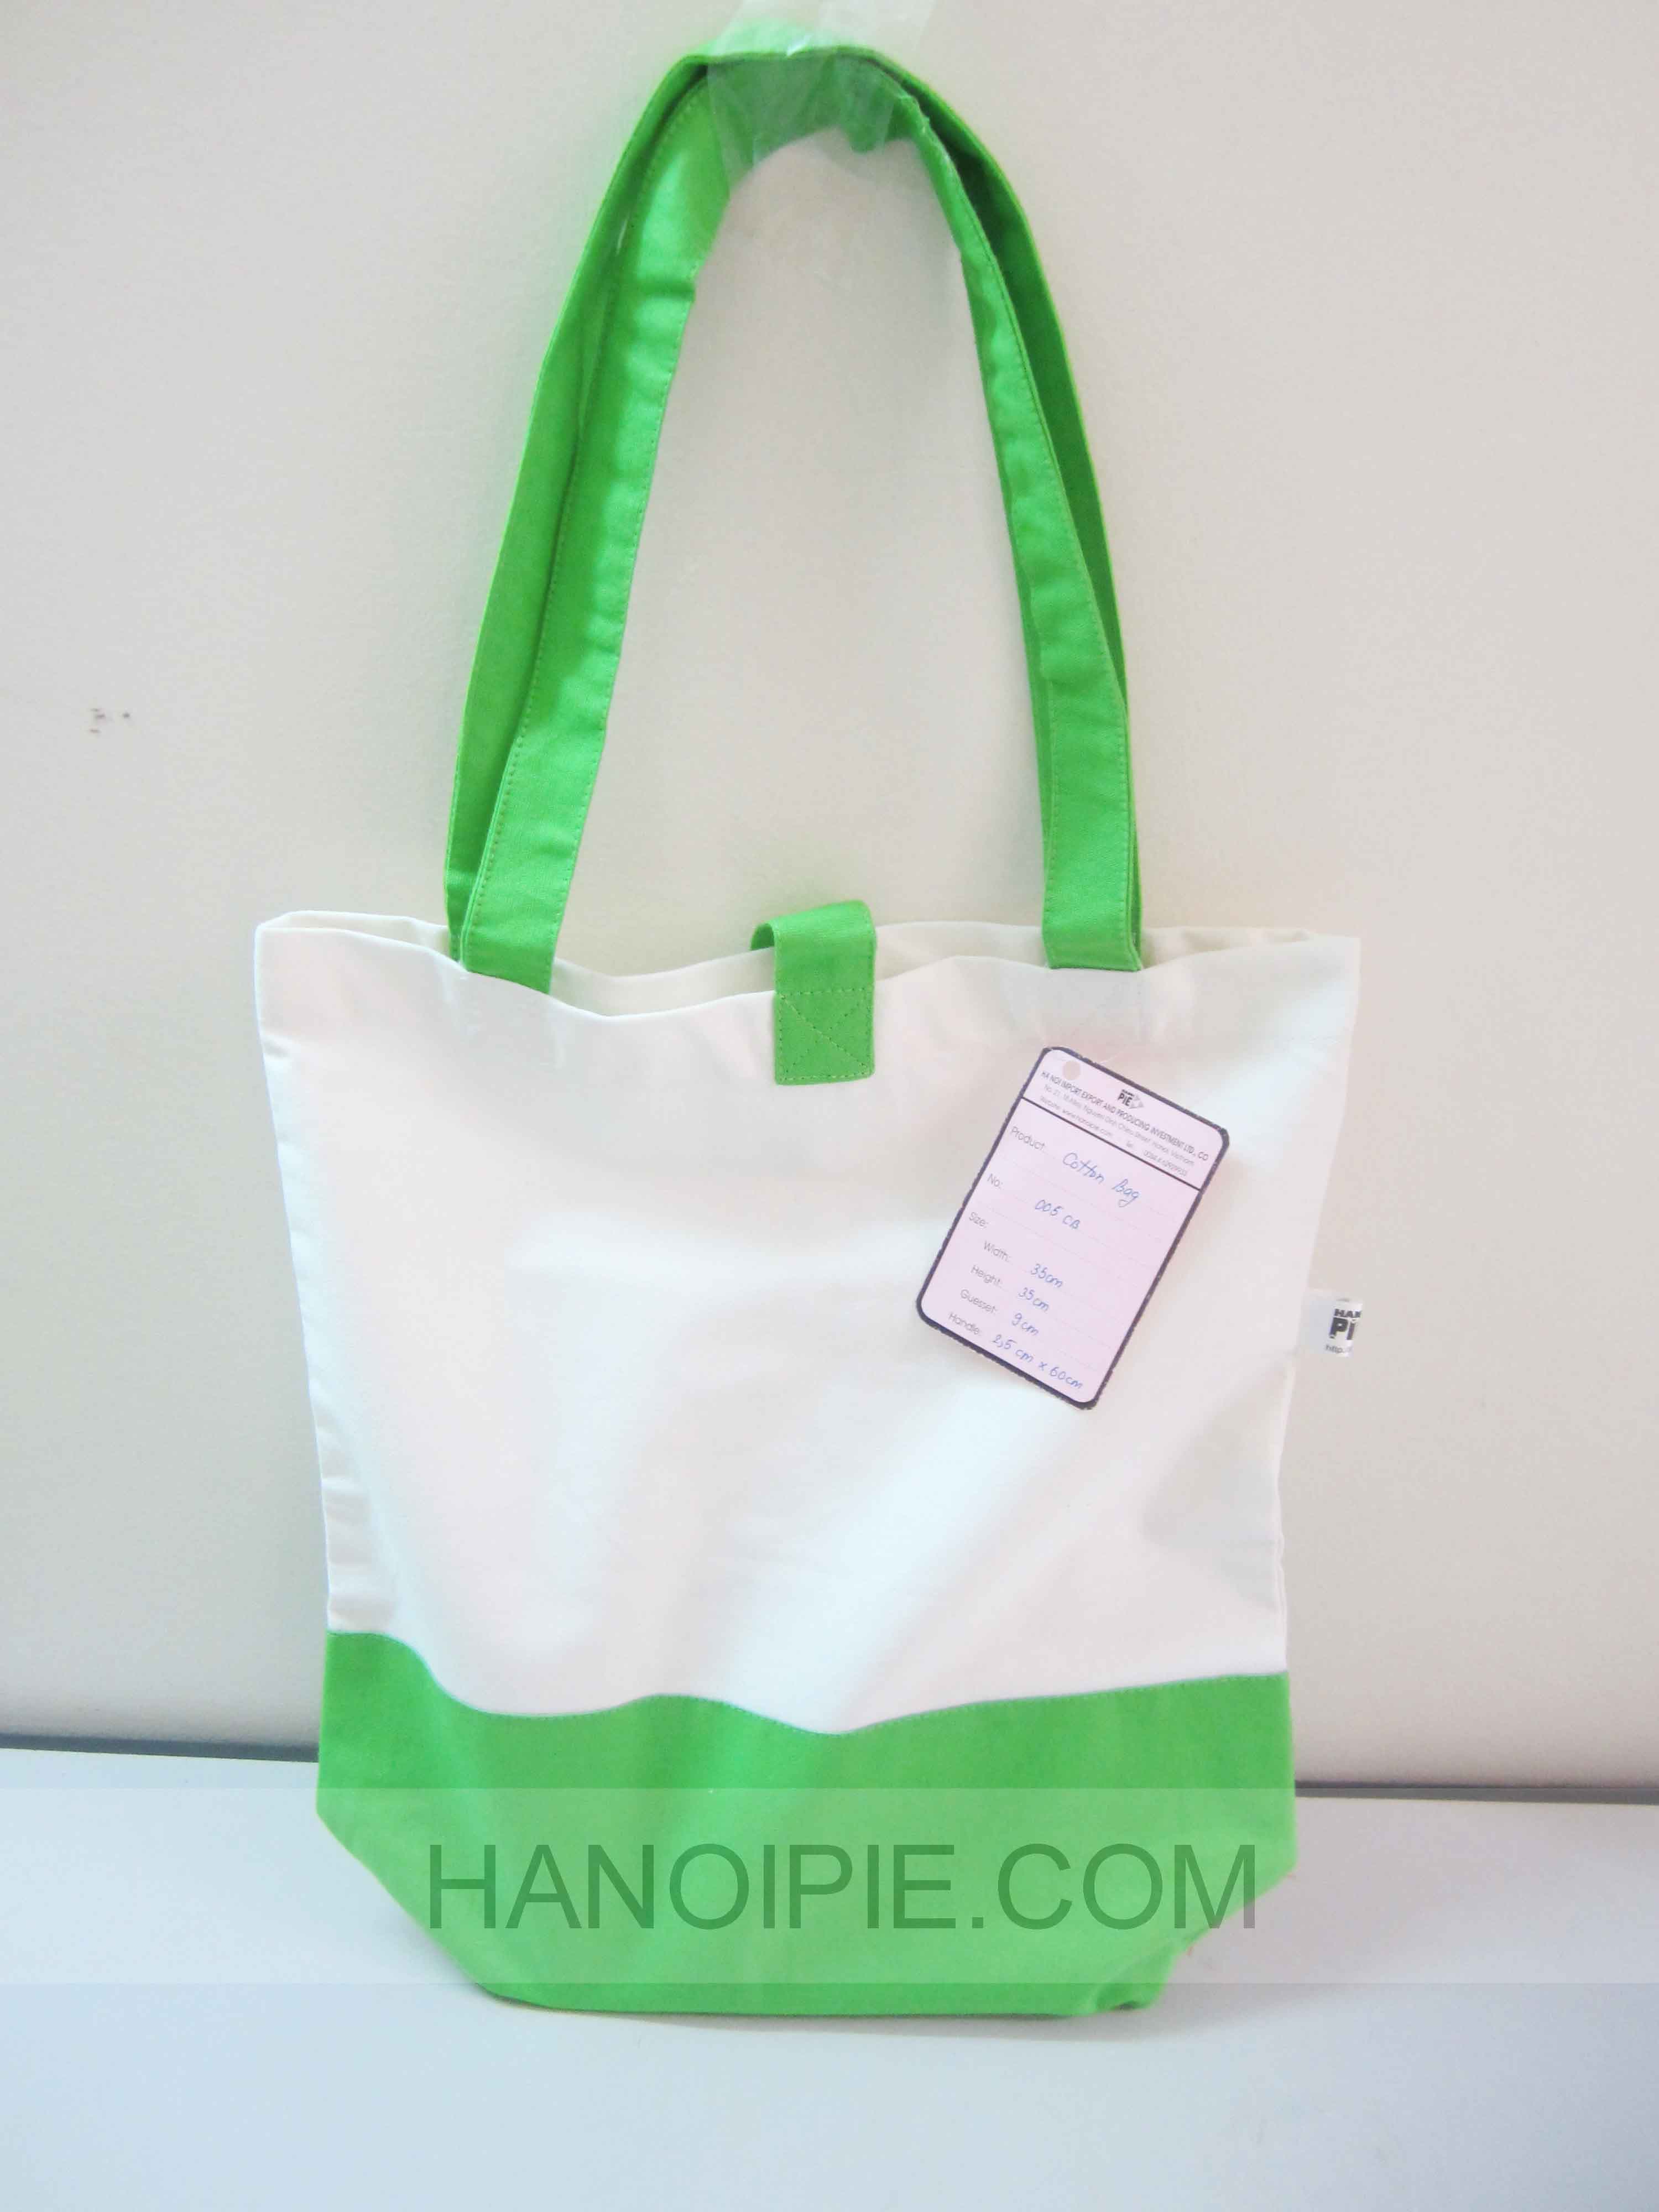 Global certificated organic large tote stationery bag